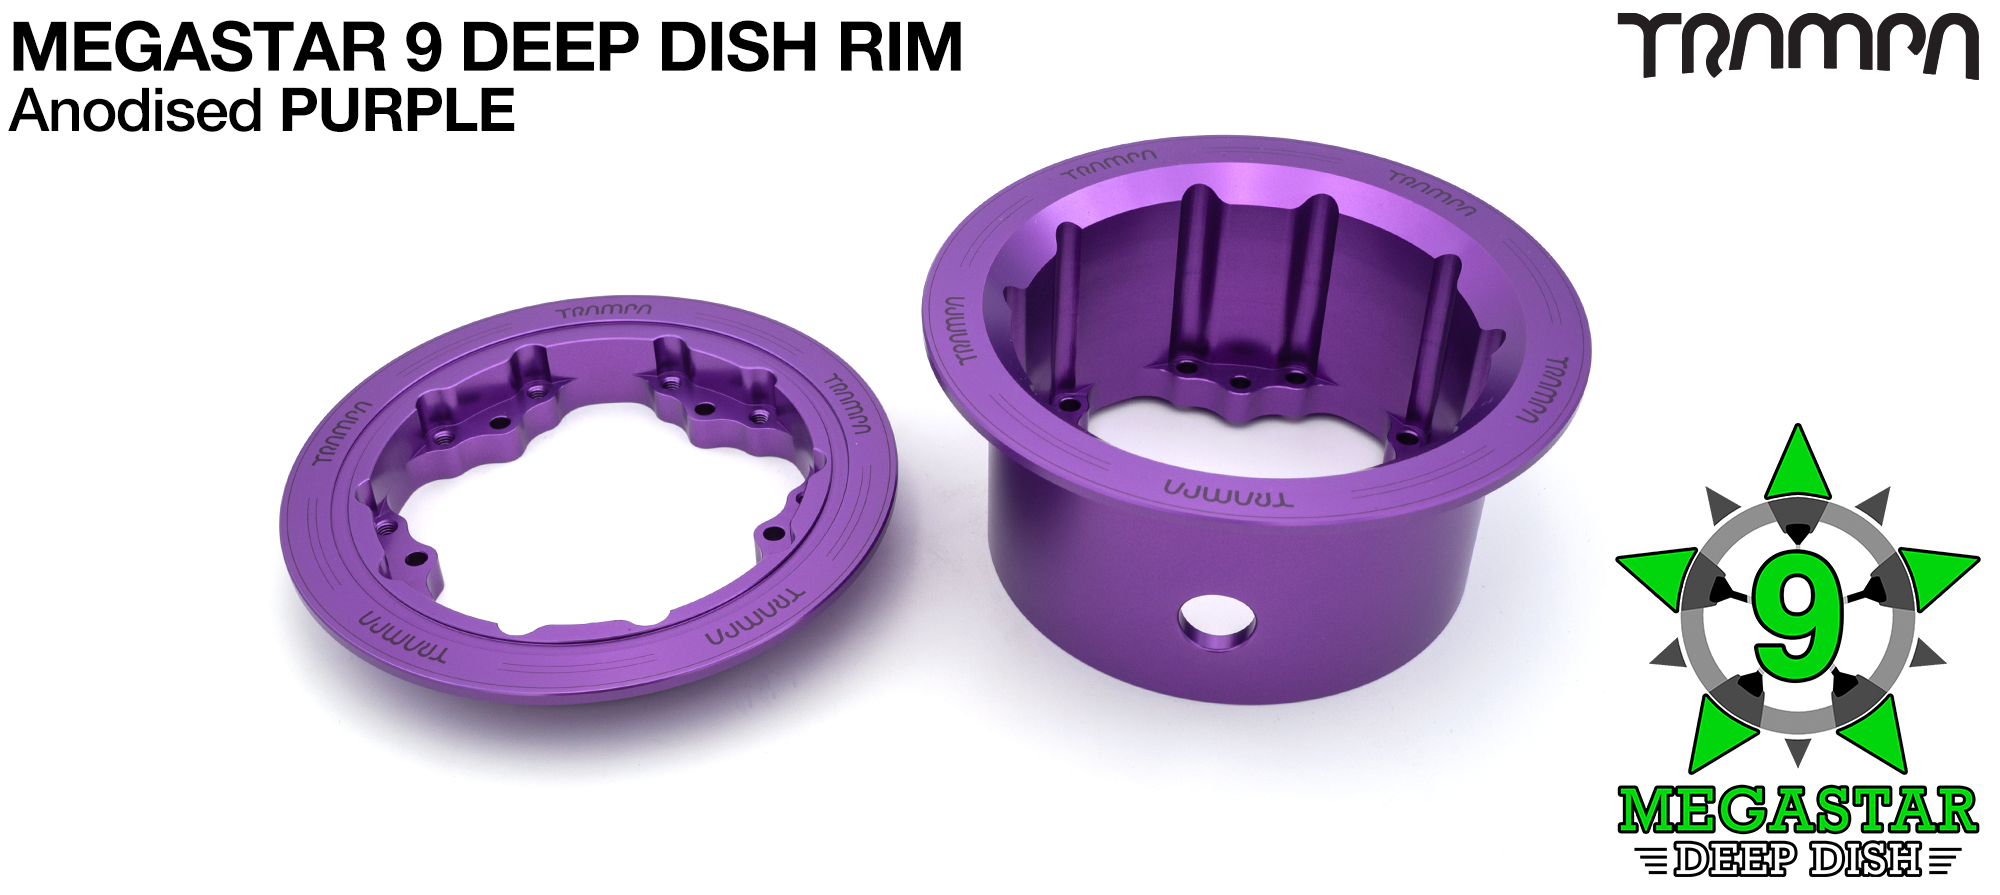 MEGASTAR 9 DD Rims Measure 3.75/4x 3 Inch. The Bearings are positioned DEEP-DISH OFF-SET & accept 3.75 & 4 Inch Rim Tyres - PURPLE